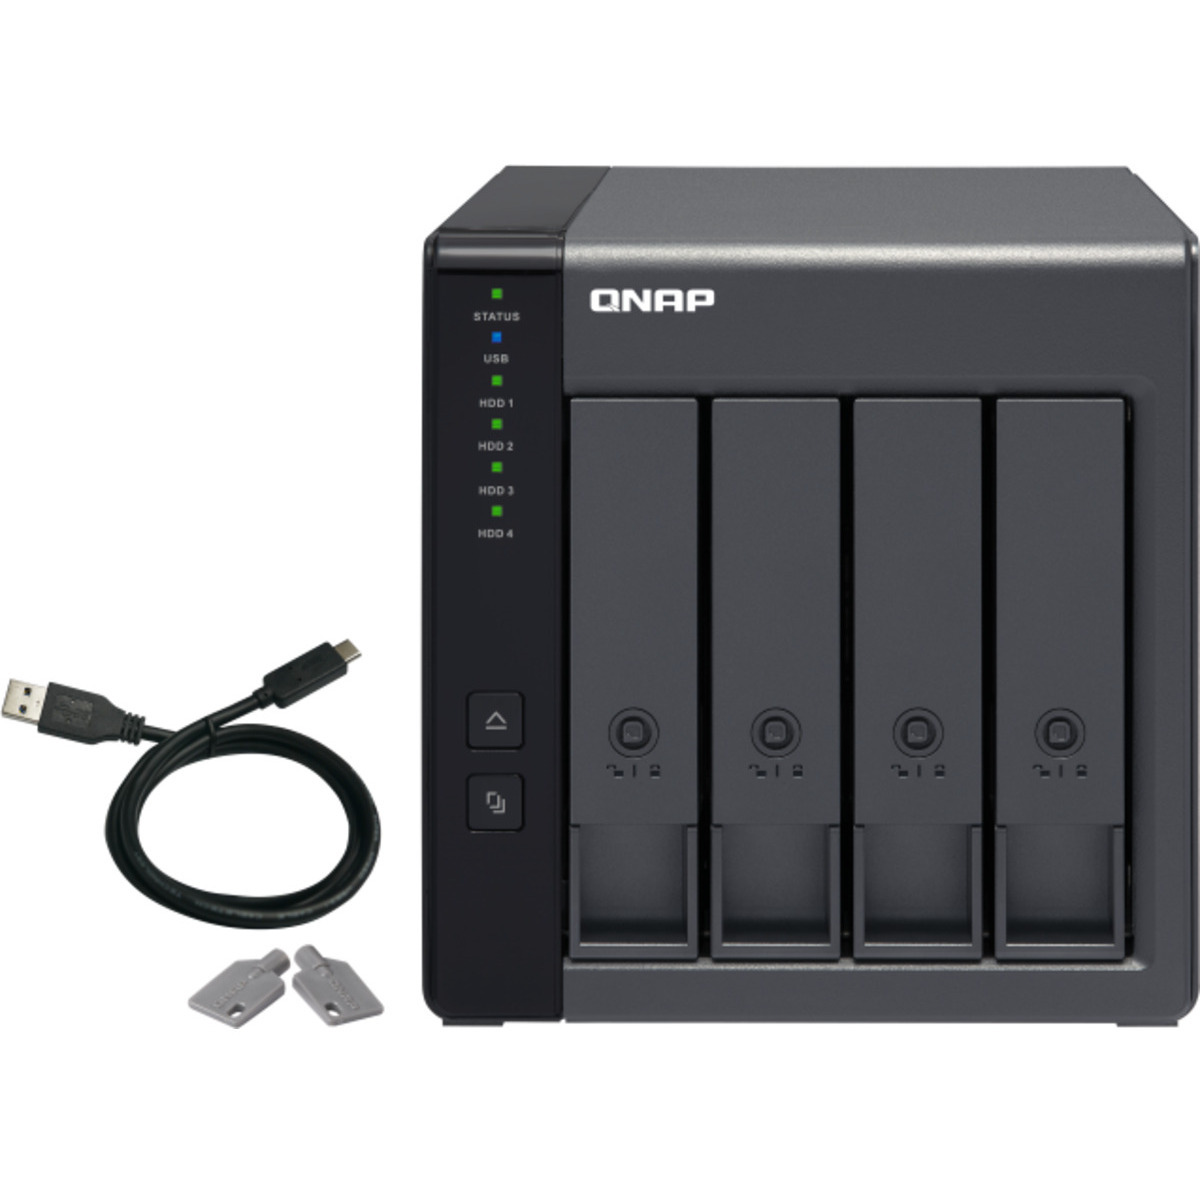 QNAP TR-004 External Expansion Drive 3tb 4-Bay Desktop Multimedia / Power User / Business Expansion Enclosure 3x1tb Western Digital Red SA500 WDS100T1R0A 2.5 560/530MB/s SATA 6Gb/s SSD NAS Class Drives Installed - Burn-In Tested TR-004 External Expansion Drive